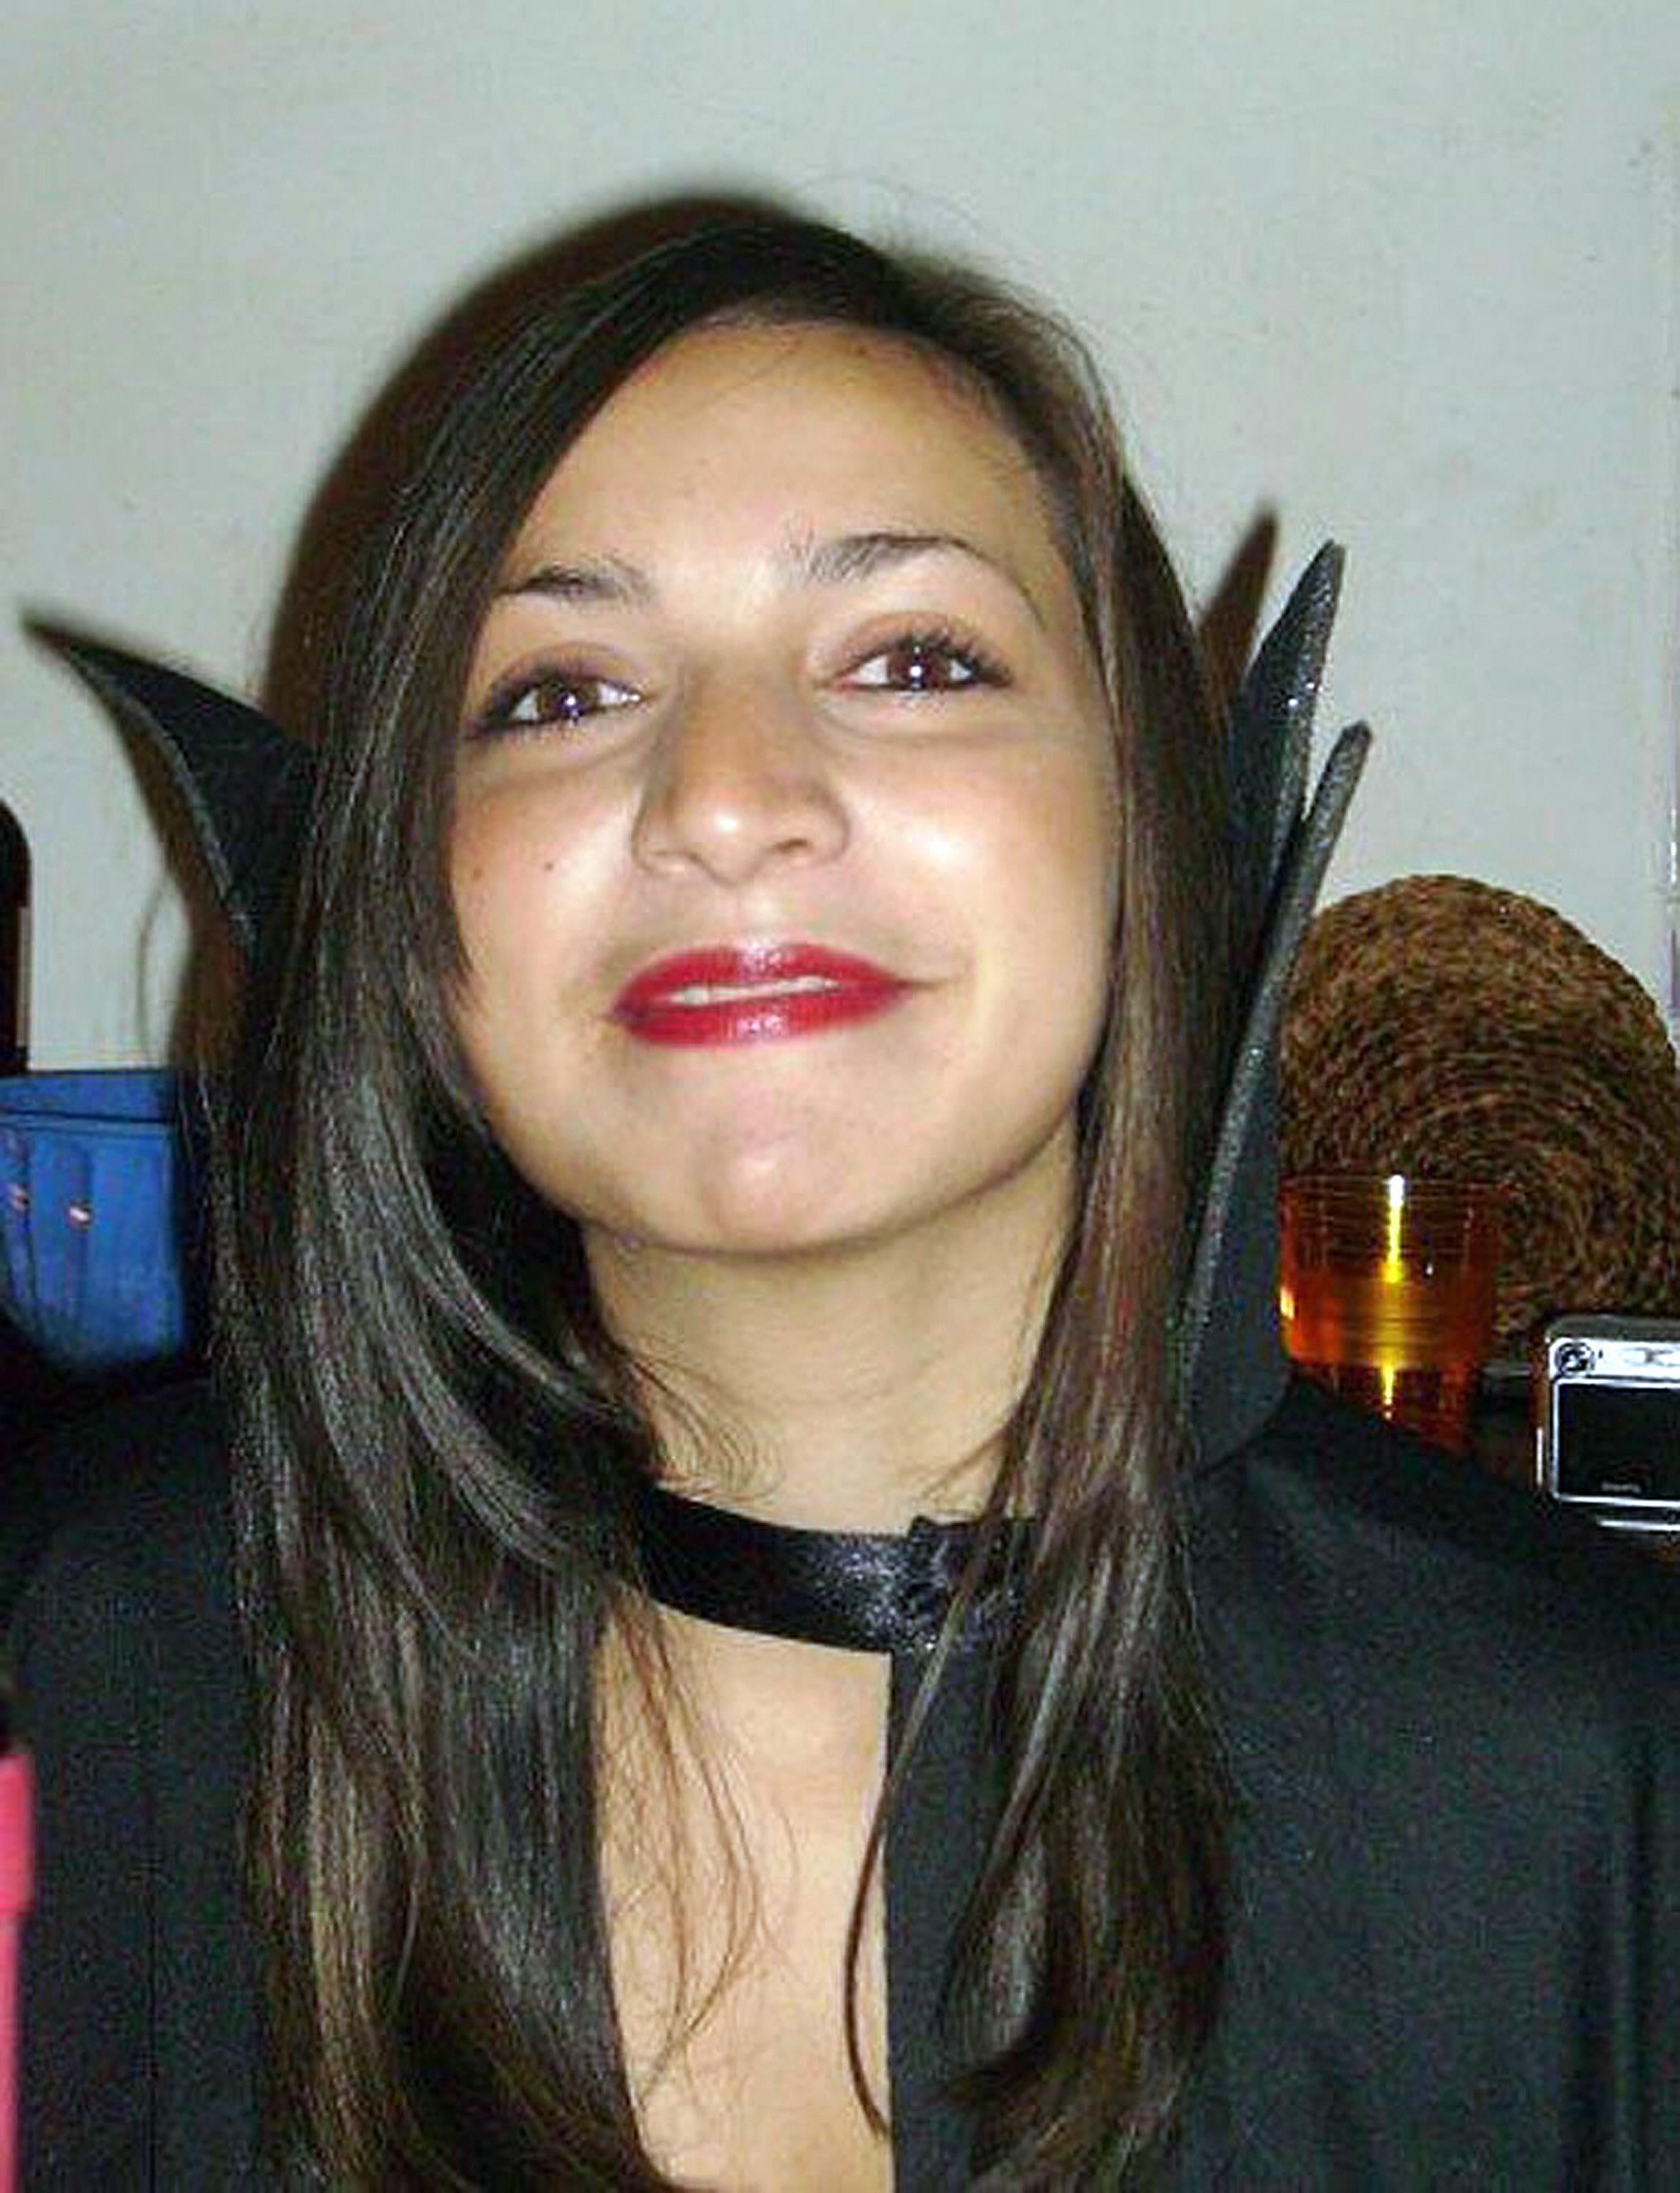 21-year old Meredith Kercher – who shared a room in Perugia, Italy, with Knox – was found dead in November 2007